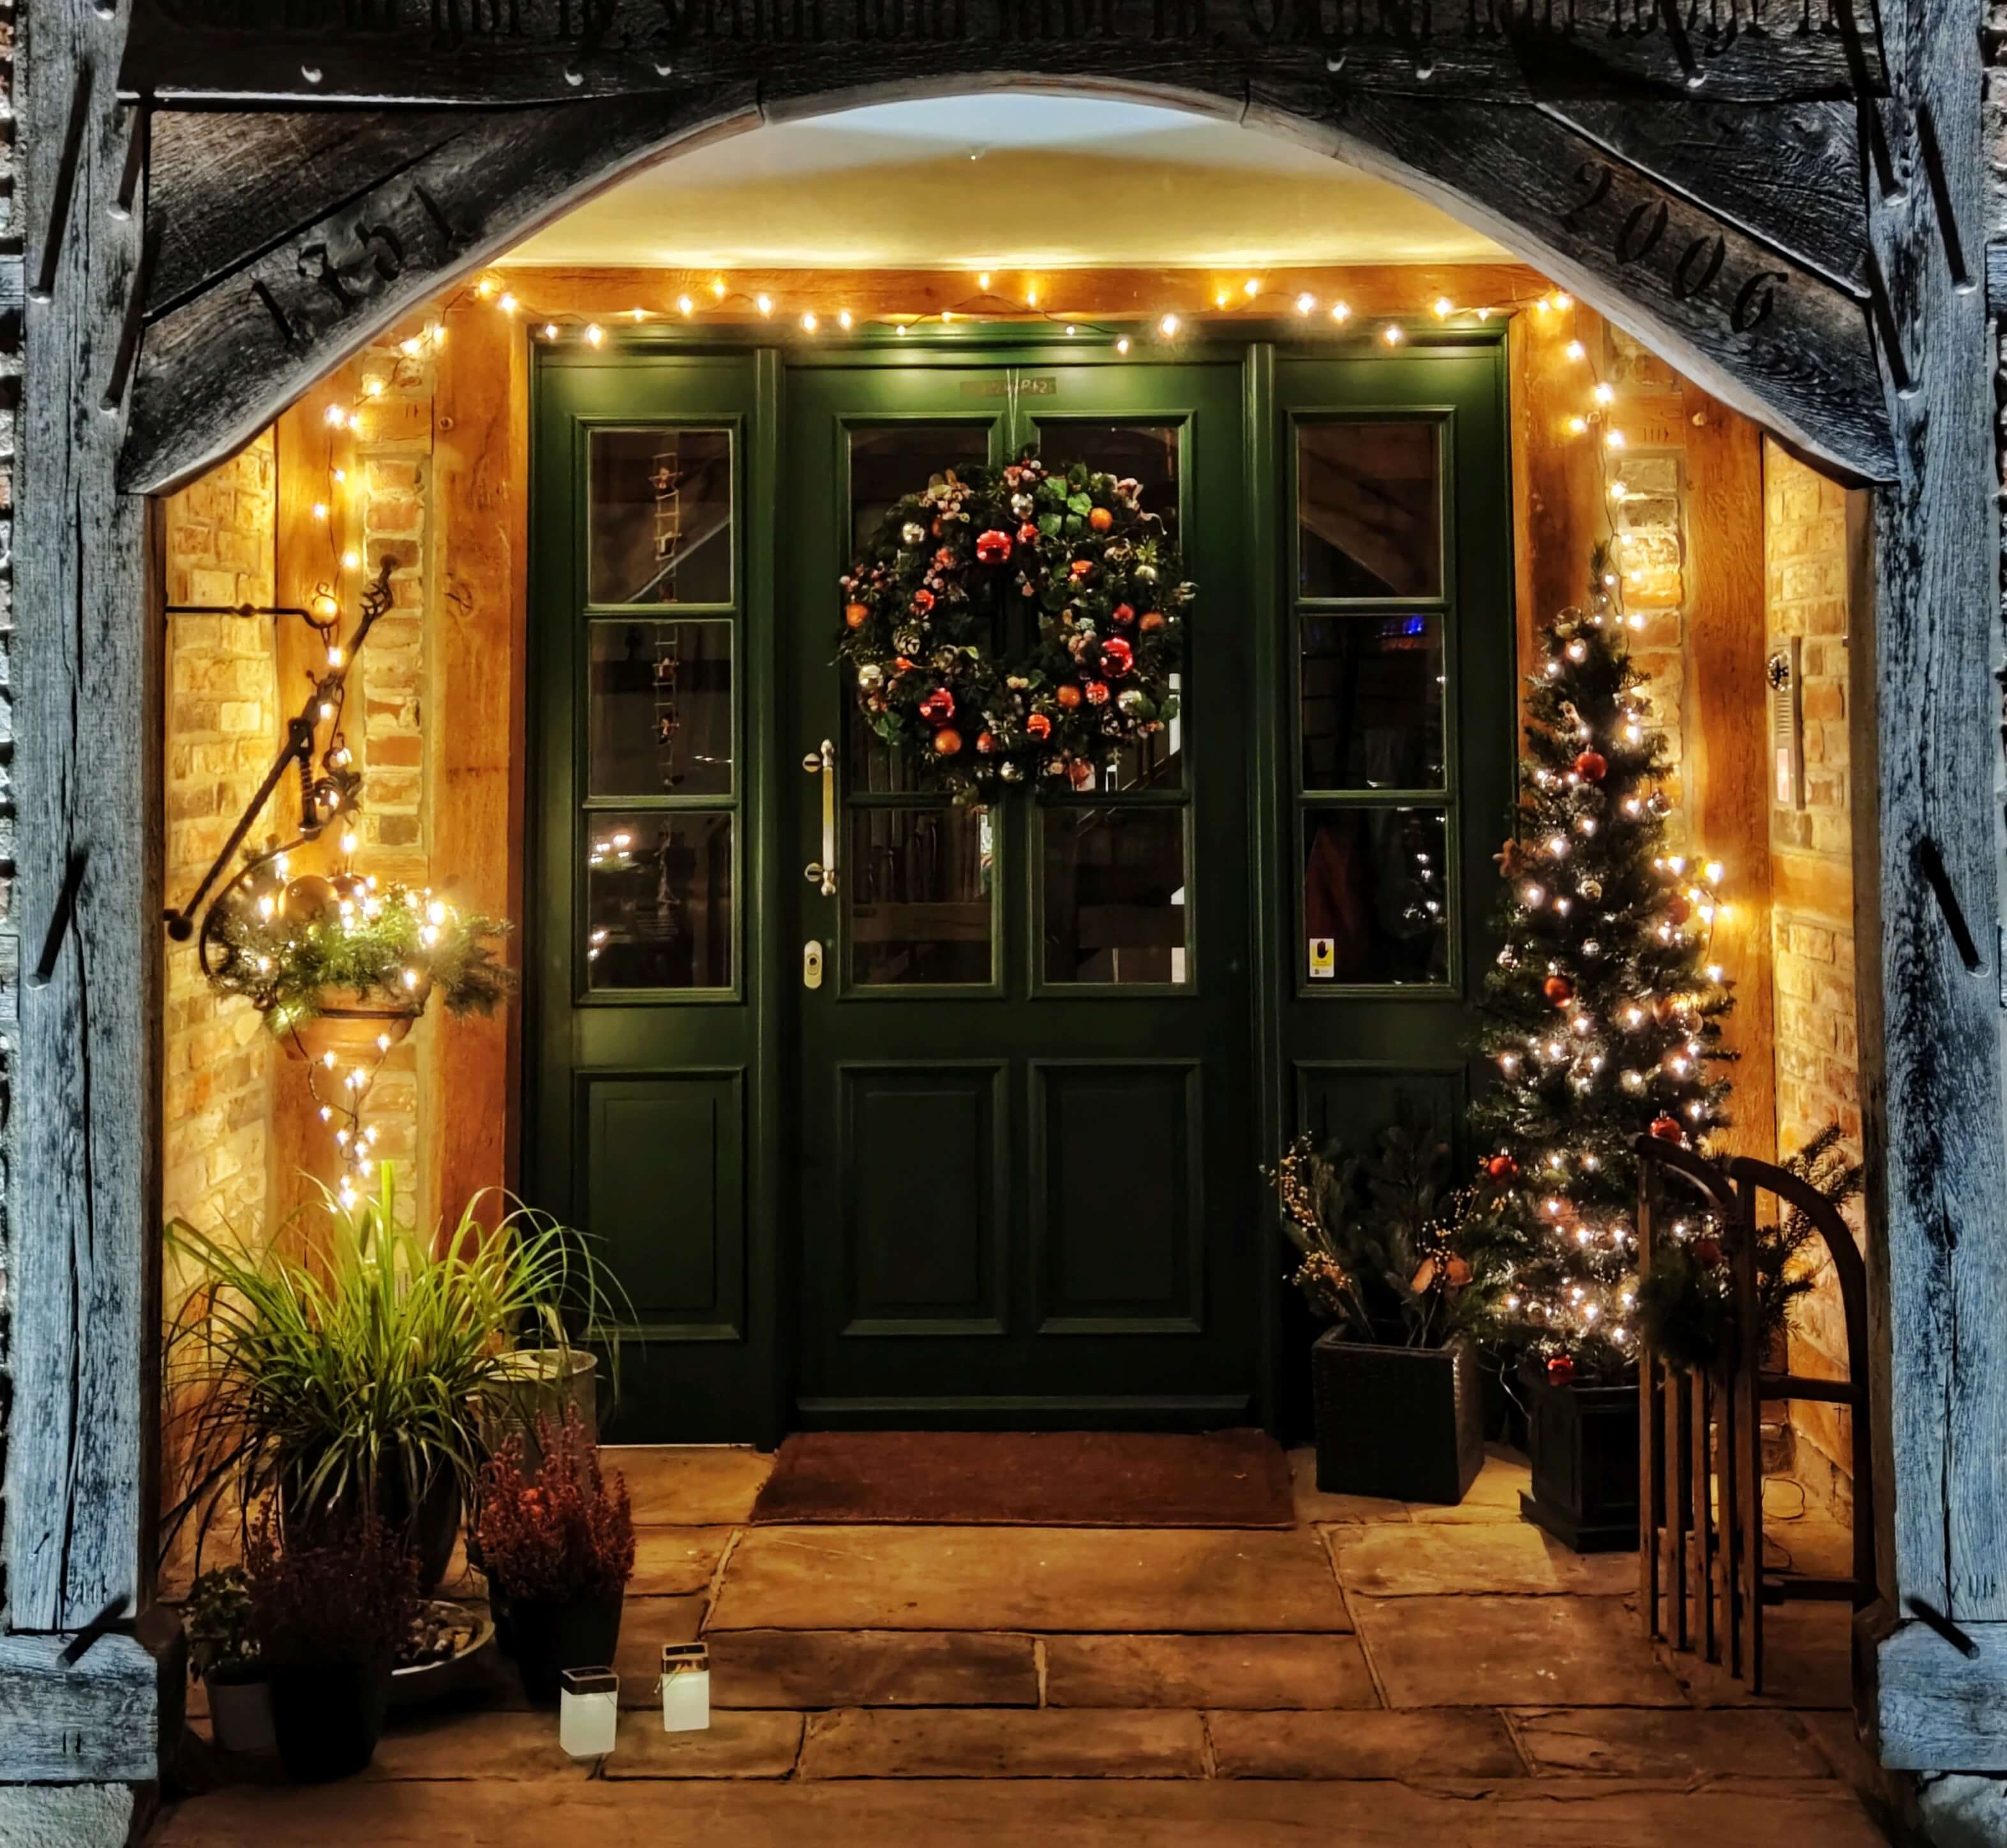 Cheerful Reasons to Sell Your Home During the Holiday Season